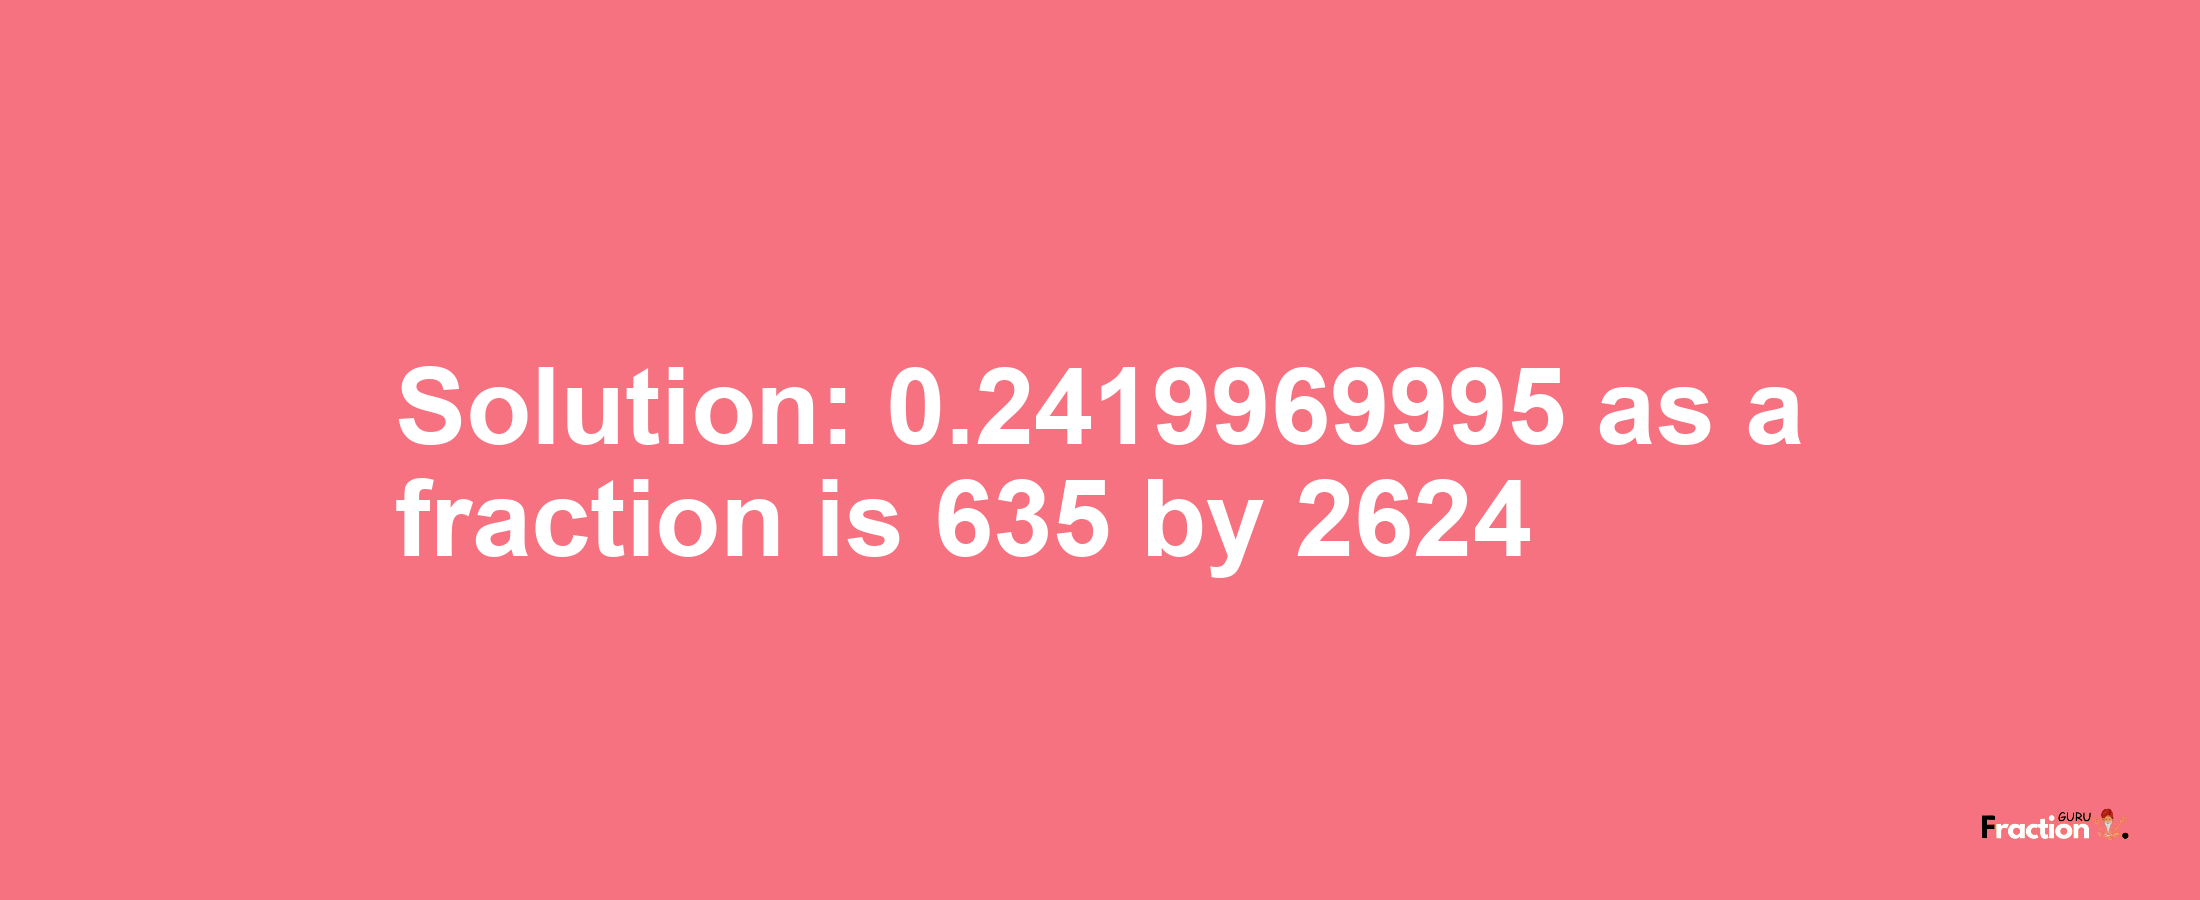 Solution:0.2419969995 as a fraction is 635/2624